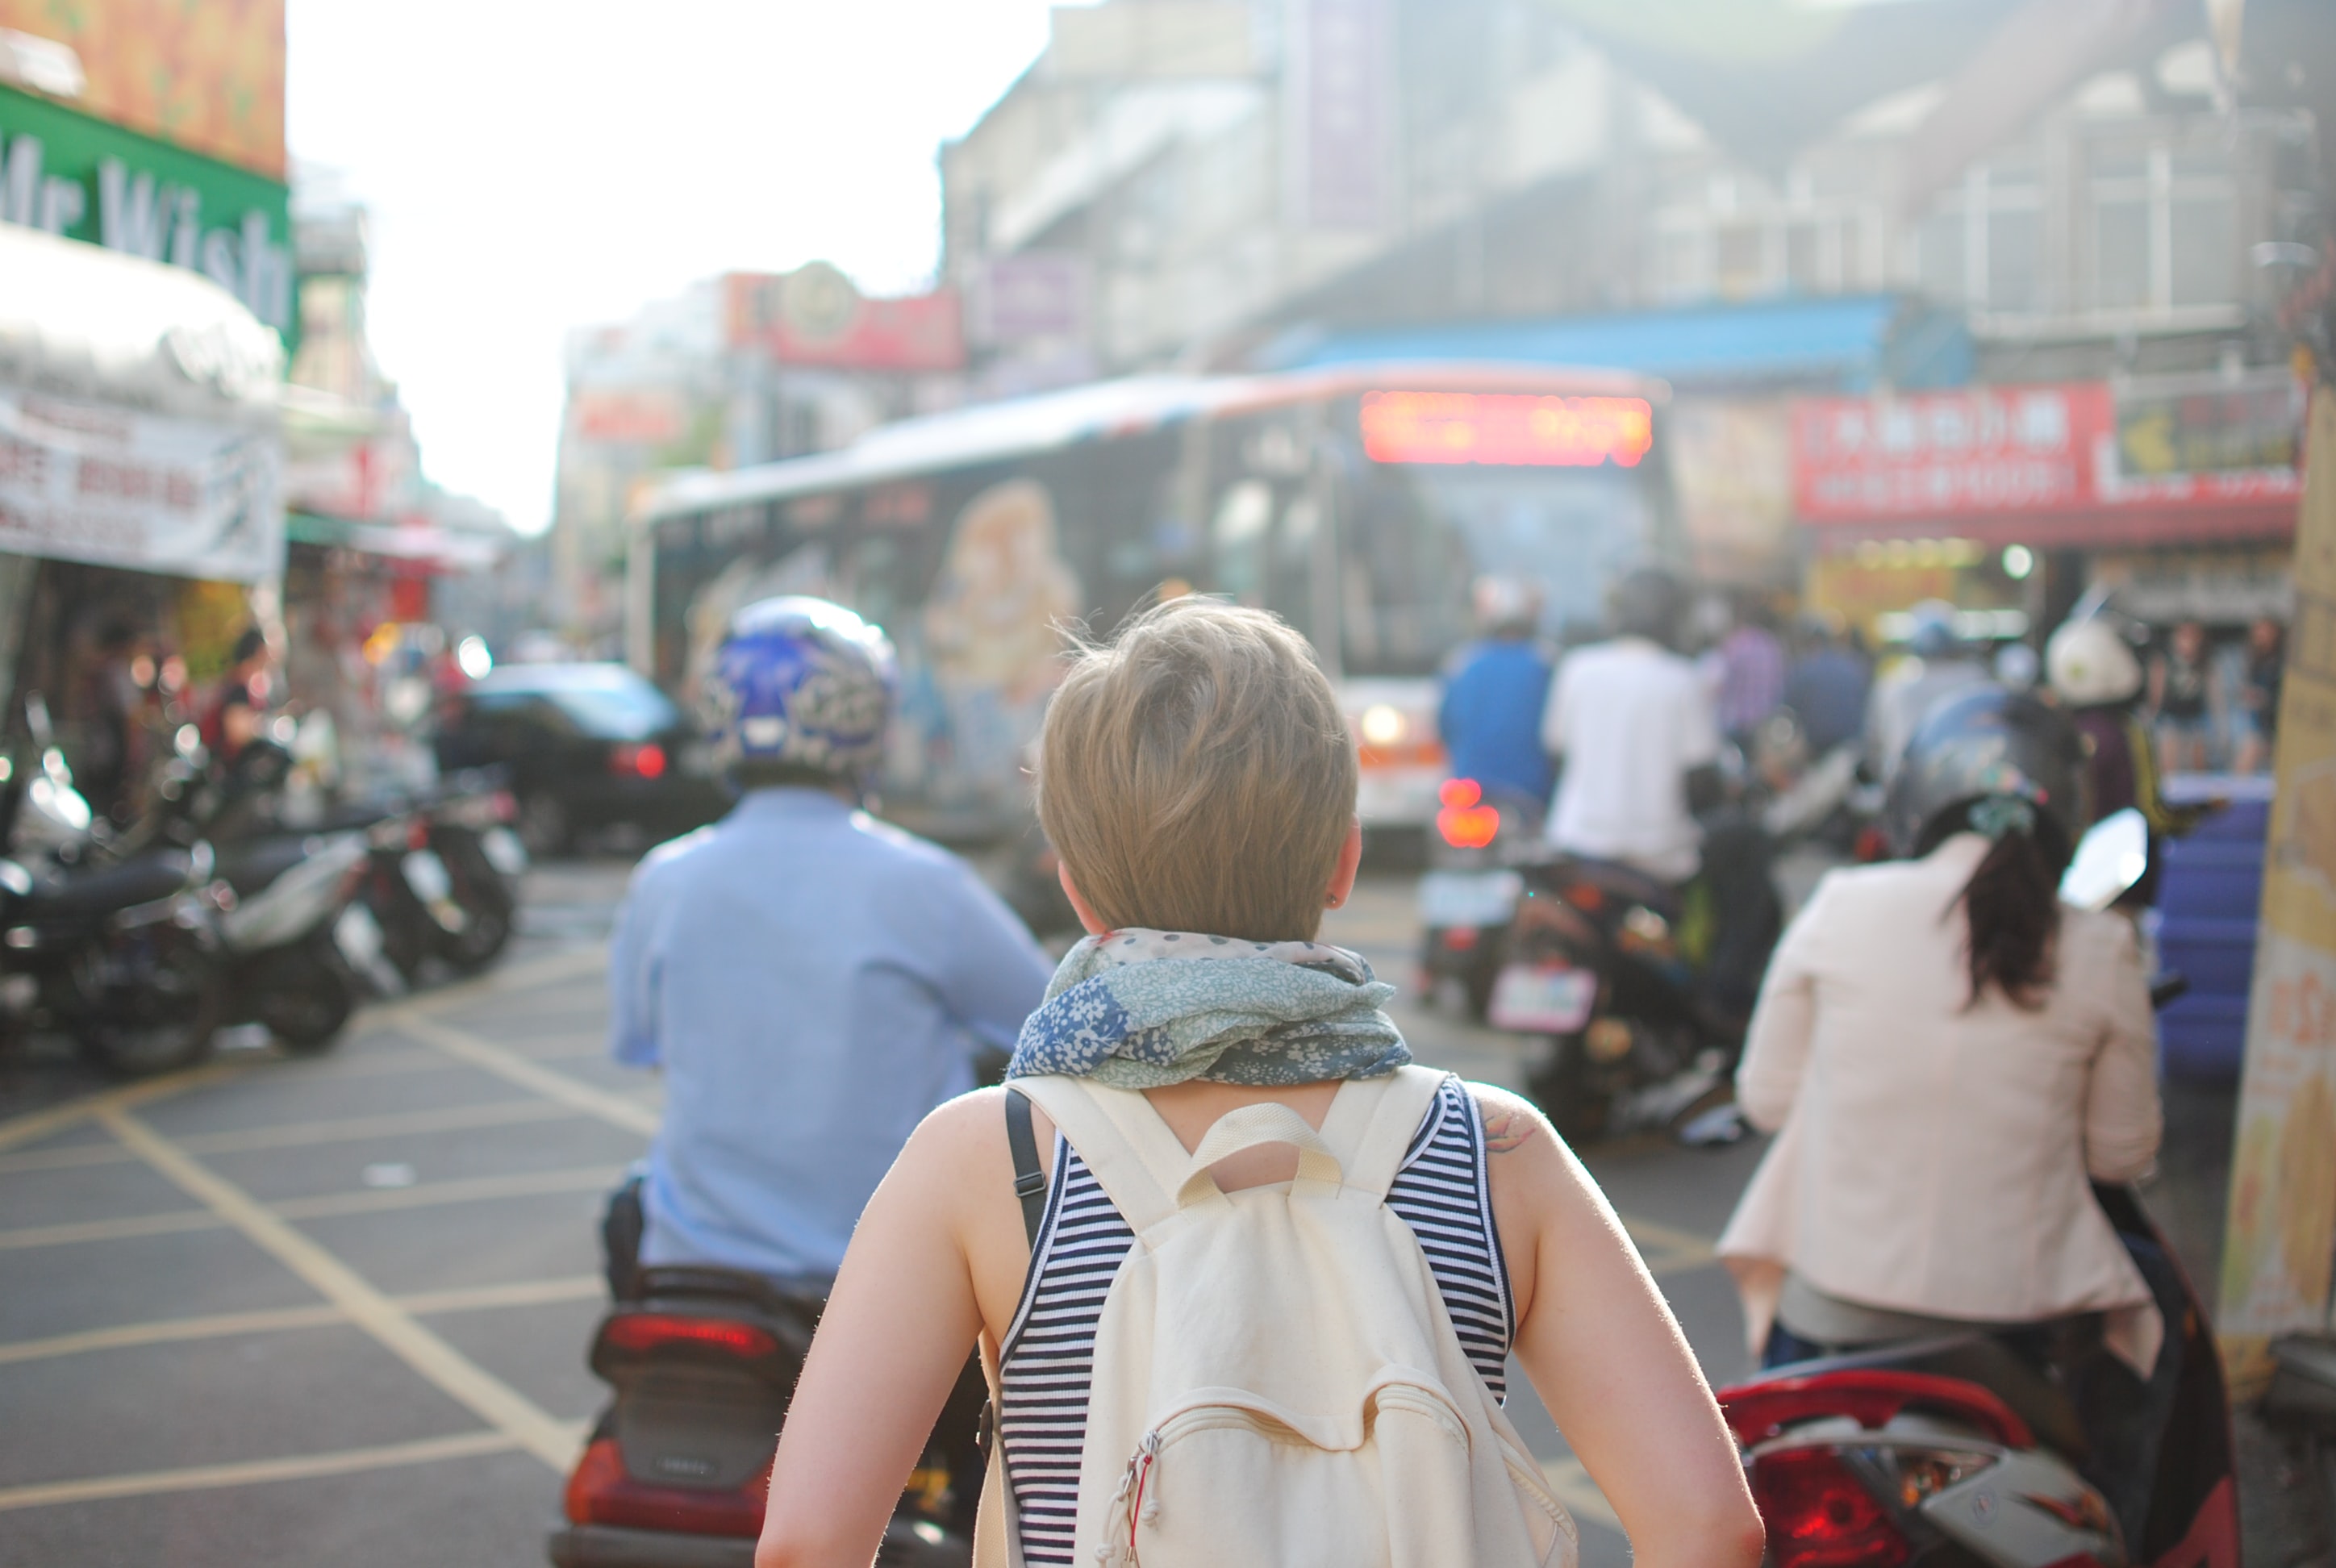 Woman backpacking in a busy city; image by Steven Lewis, via Unsplash.com.